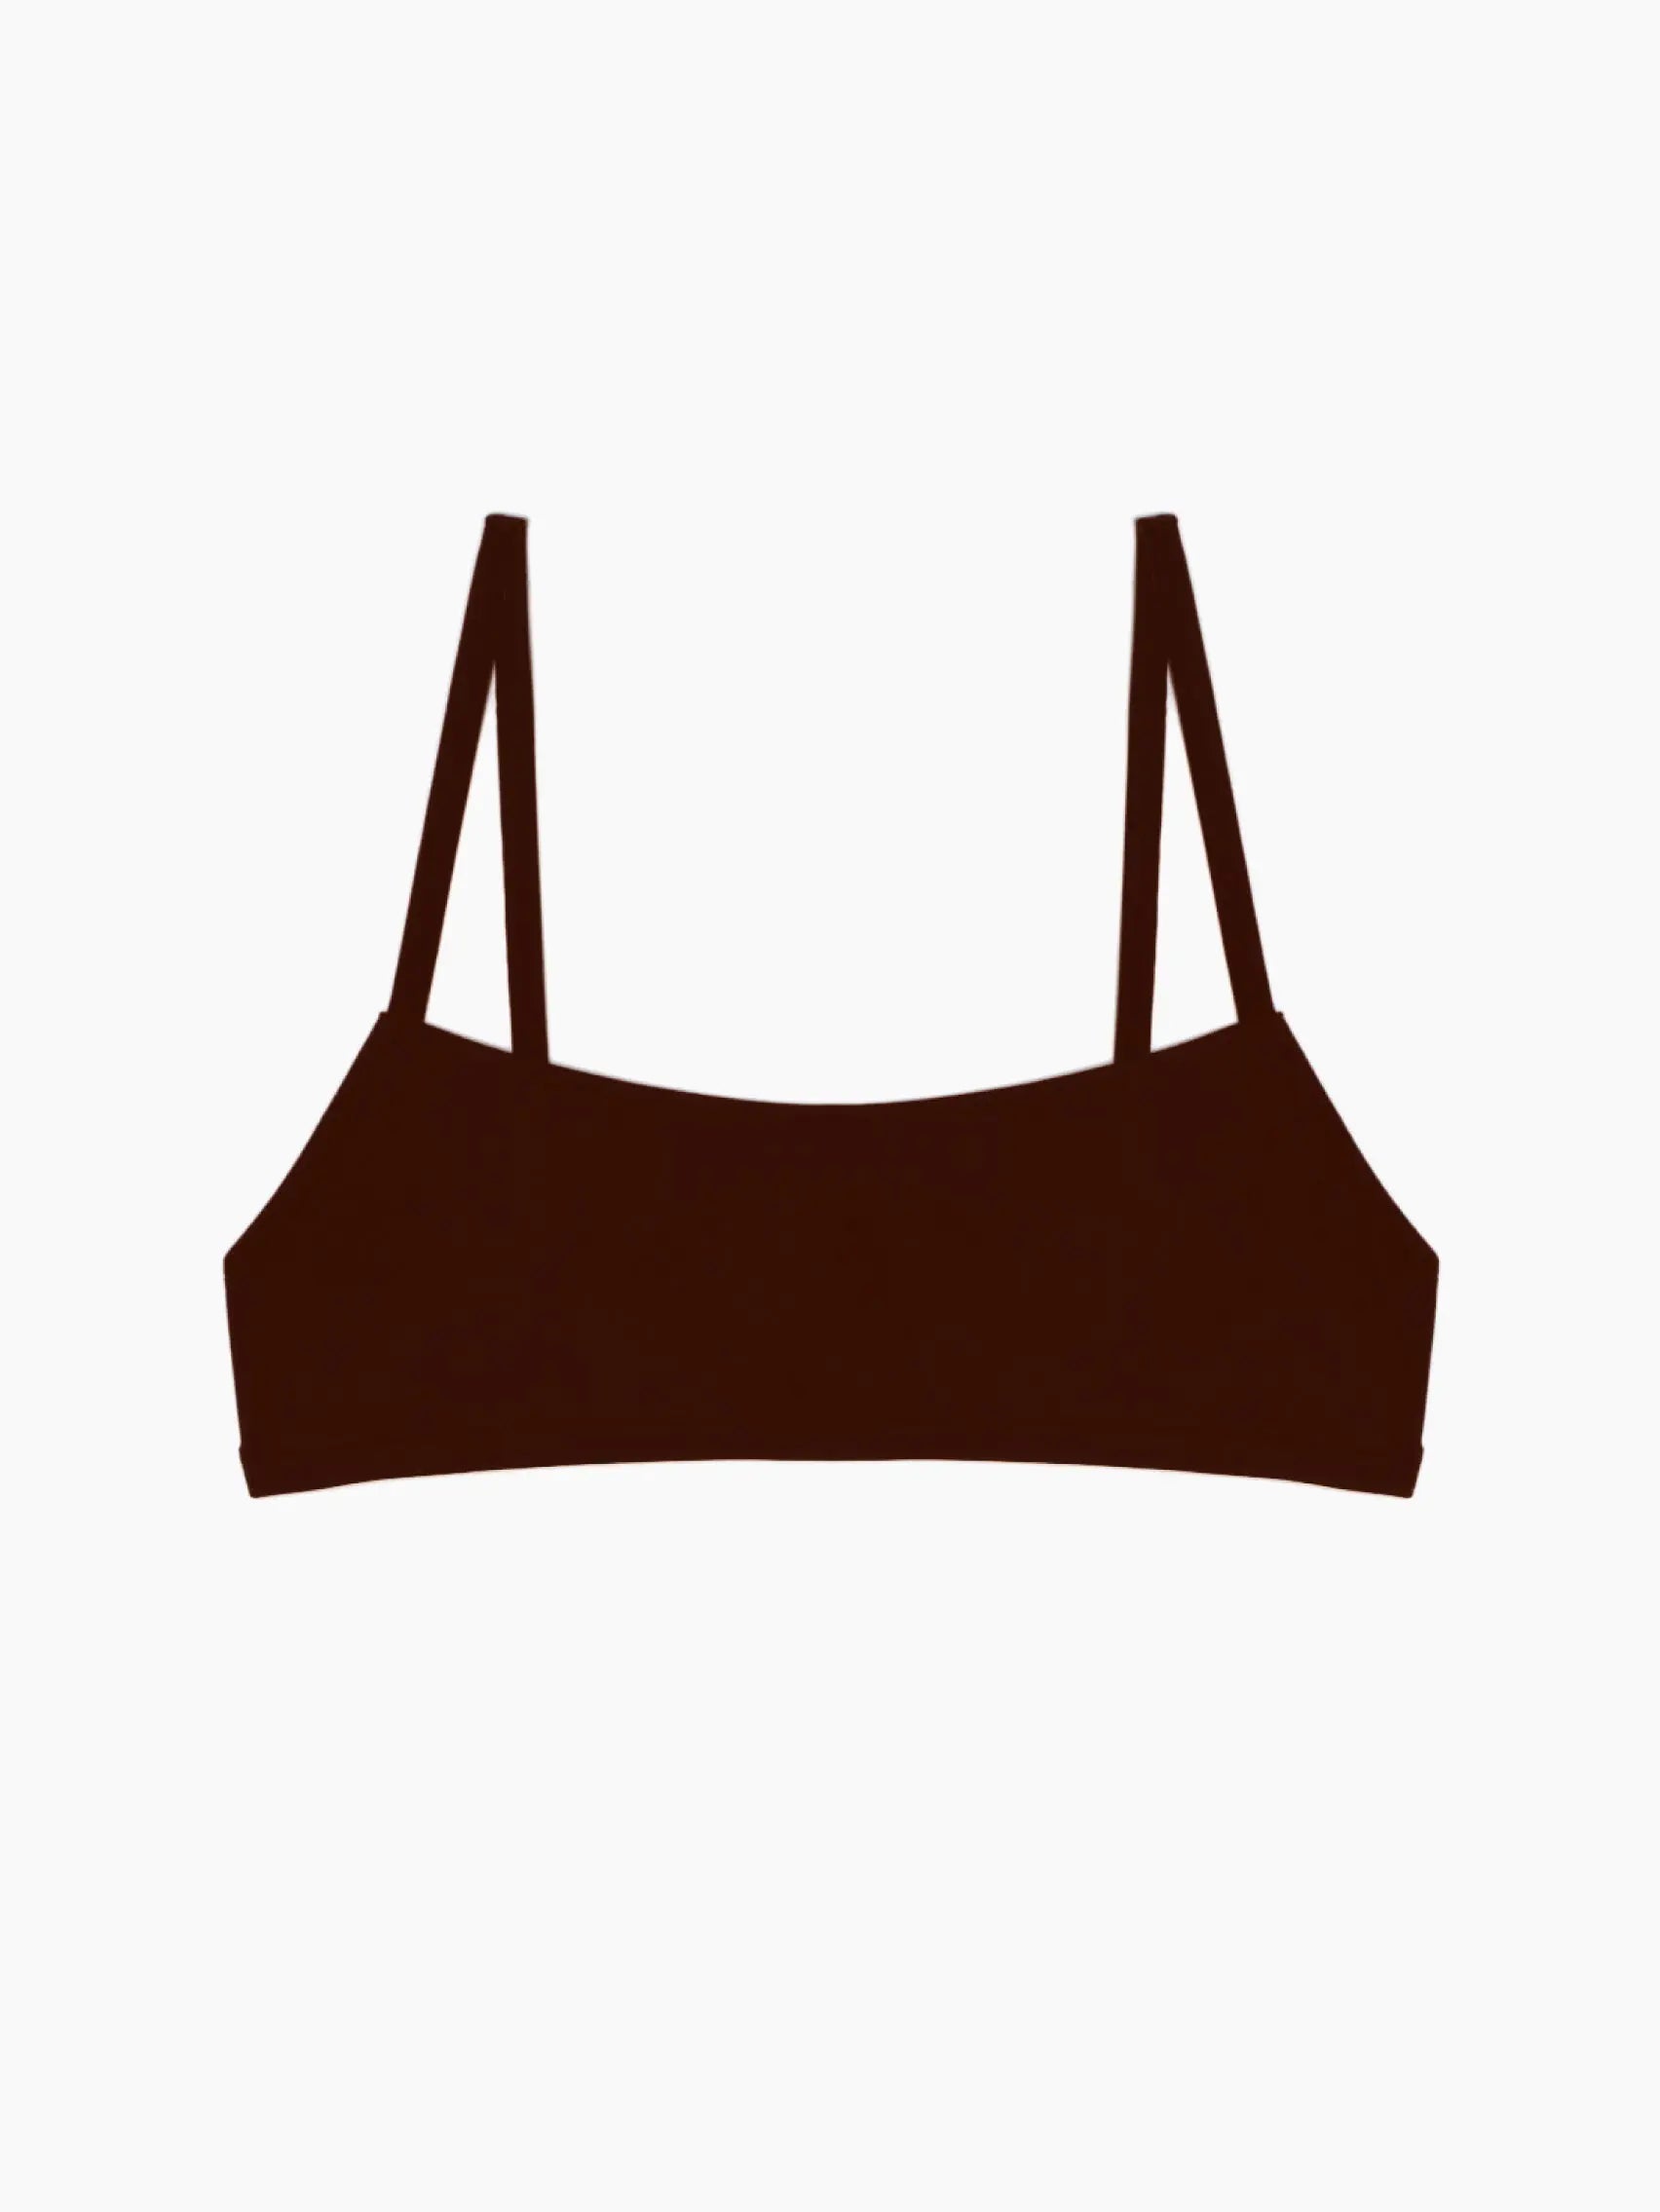 A dark brown Undici Bikini Top Brown from Lido with thin shoulder straps is displayed against a white background. The bikini top, available at Bassal Store in Barcelona, boasts a simple, minimalist design with a straight neckline and wide sidebands.